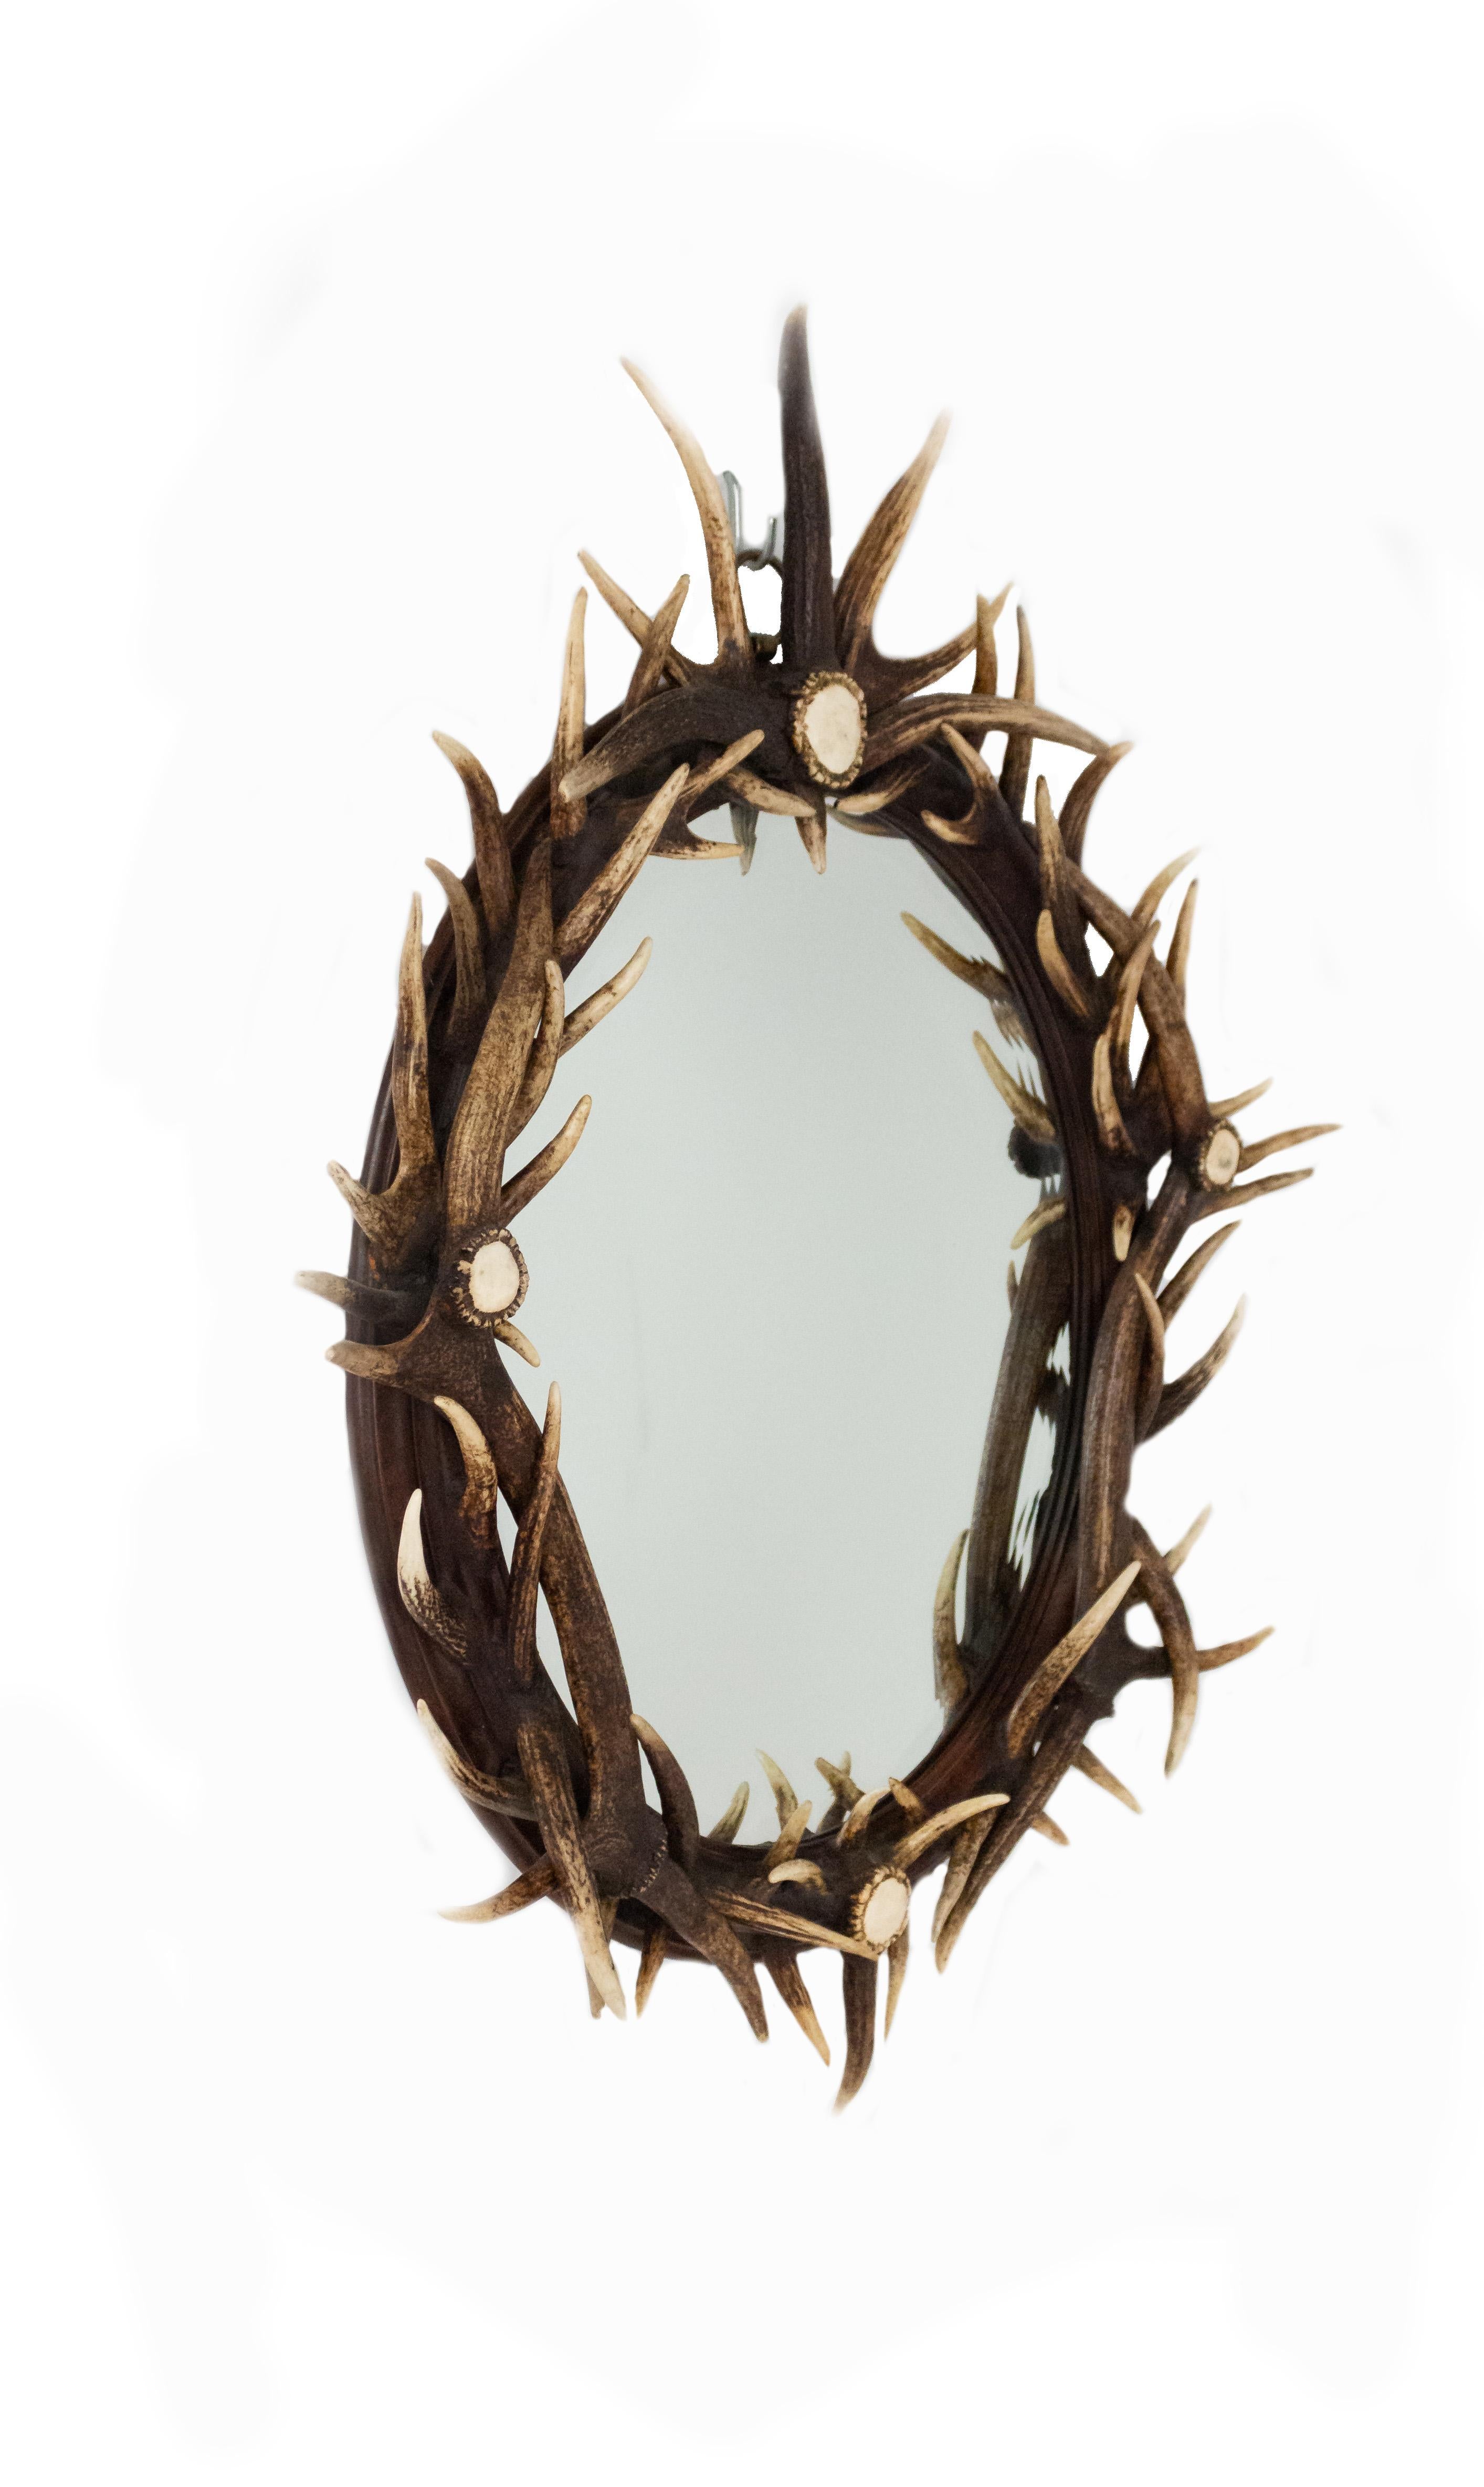 Rustic Continental style (19th-20th century) oval wall mirror with antler-mounted frame.
 